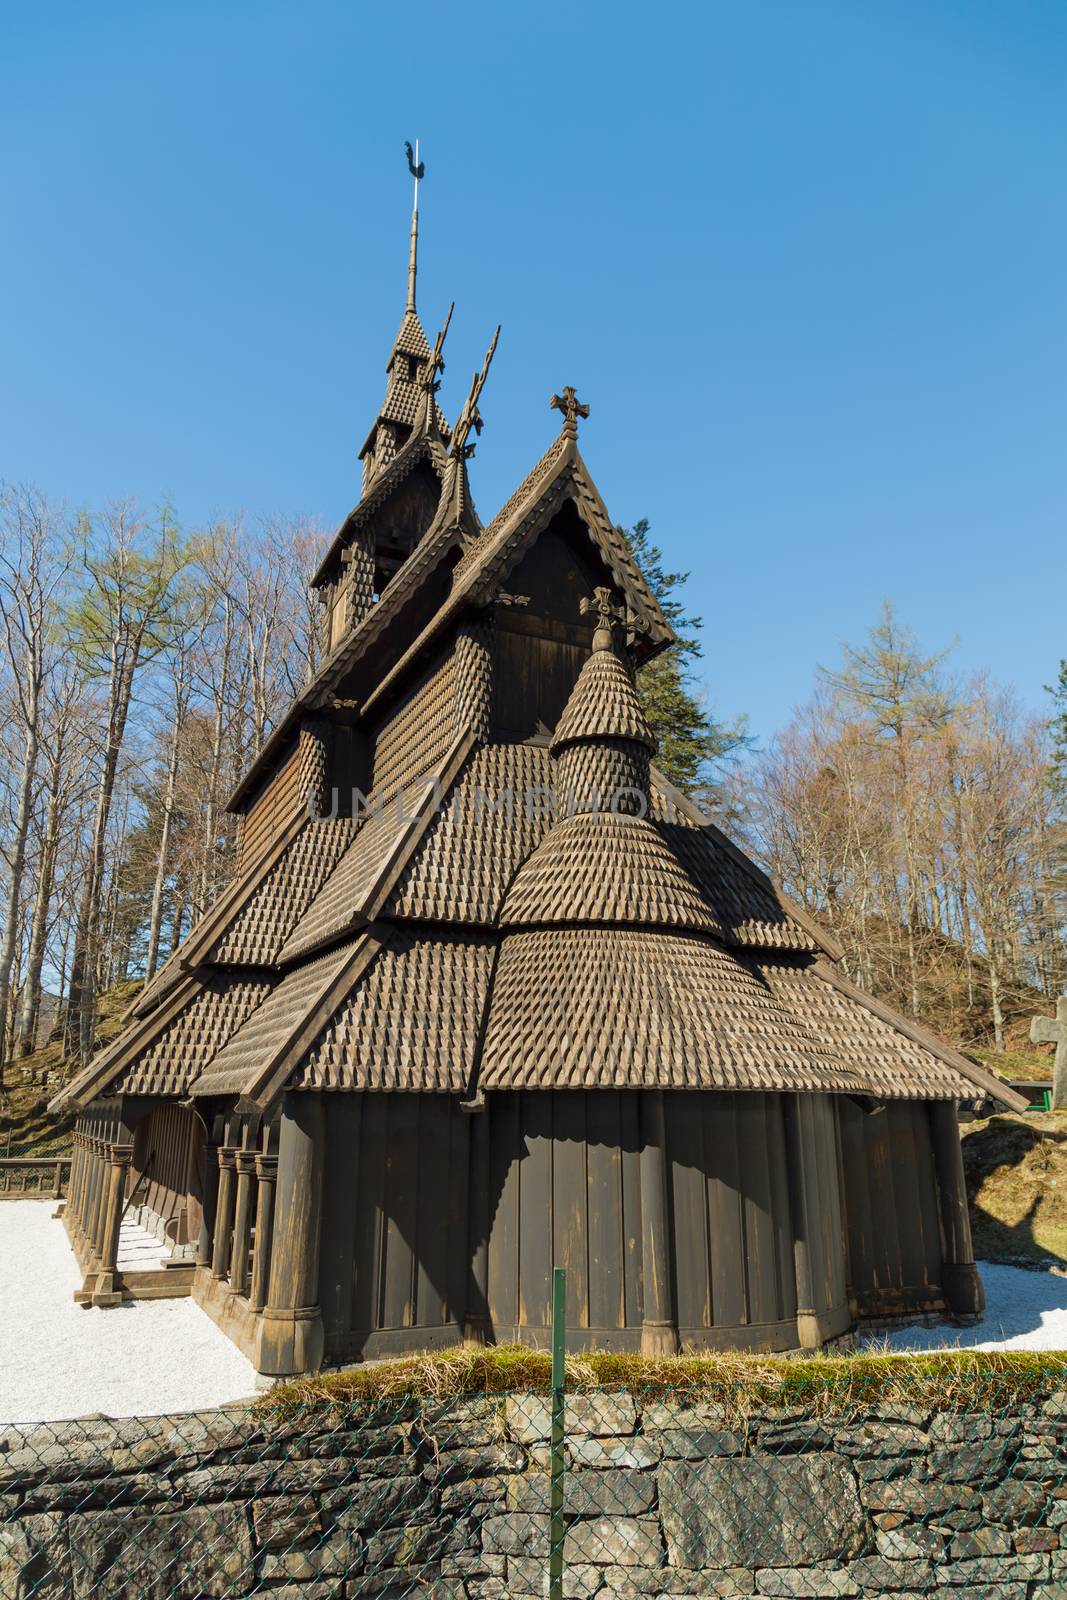 A picture of the fana stavechurch